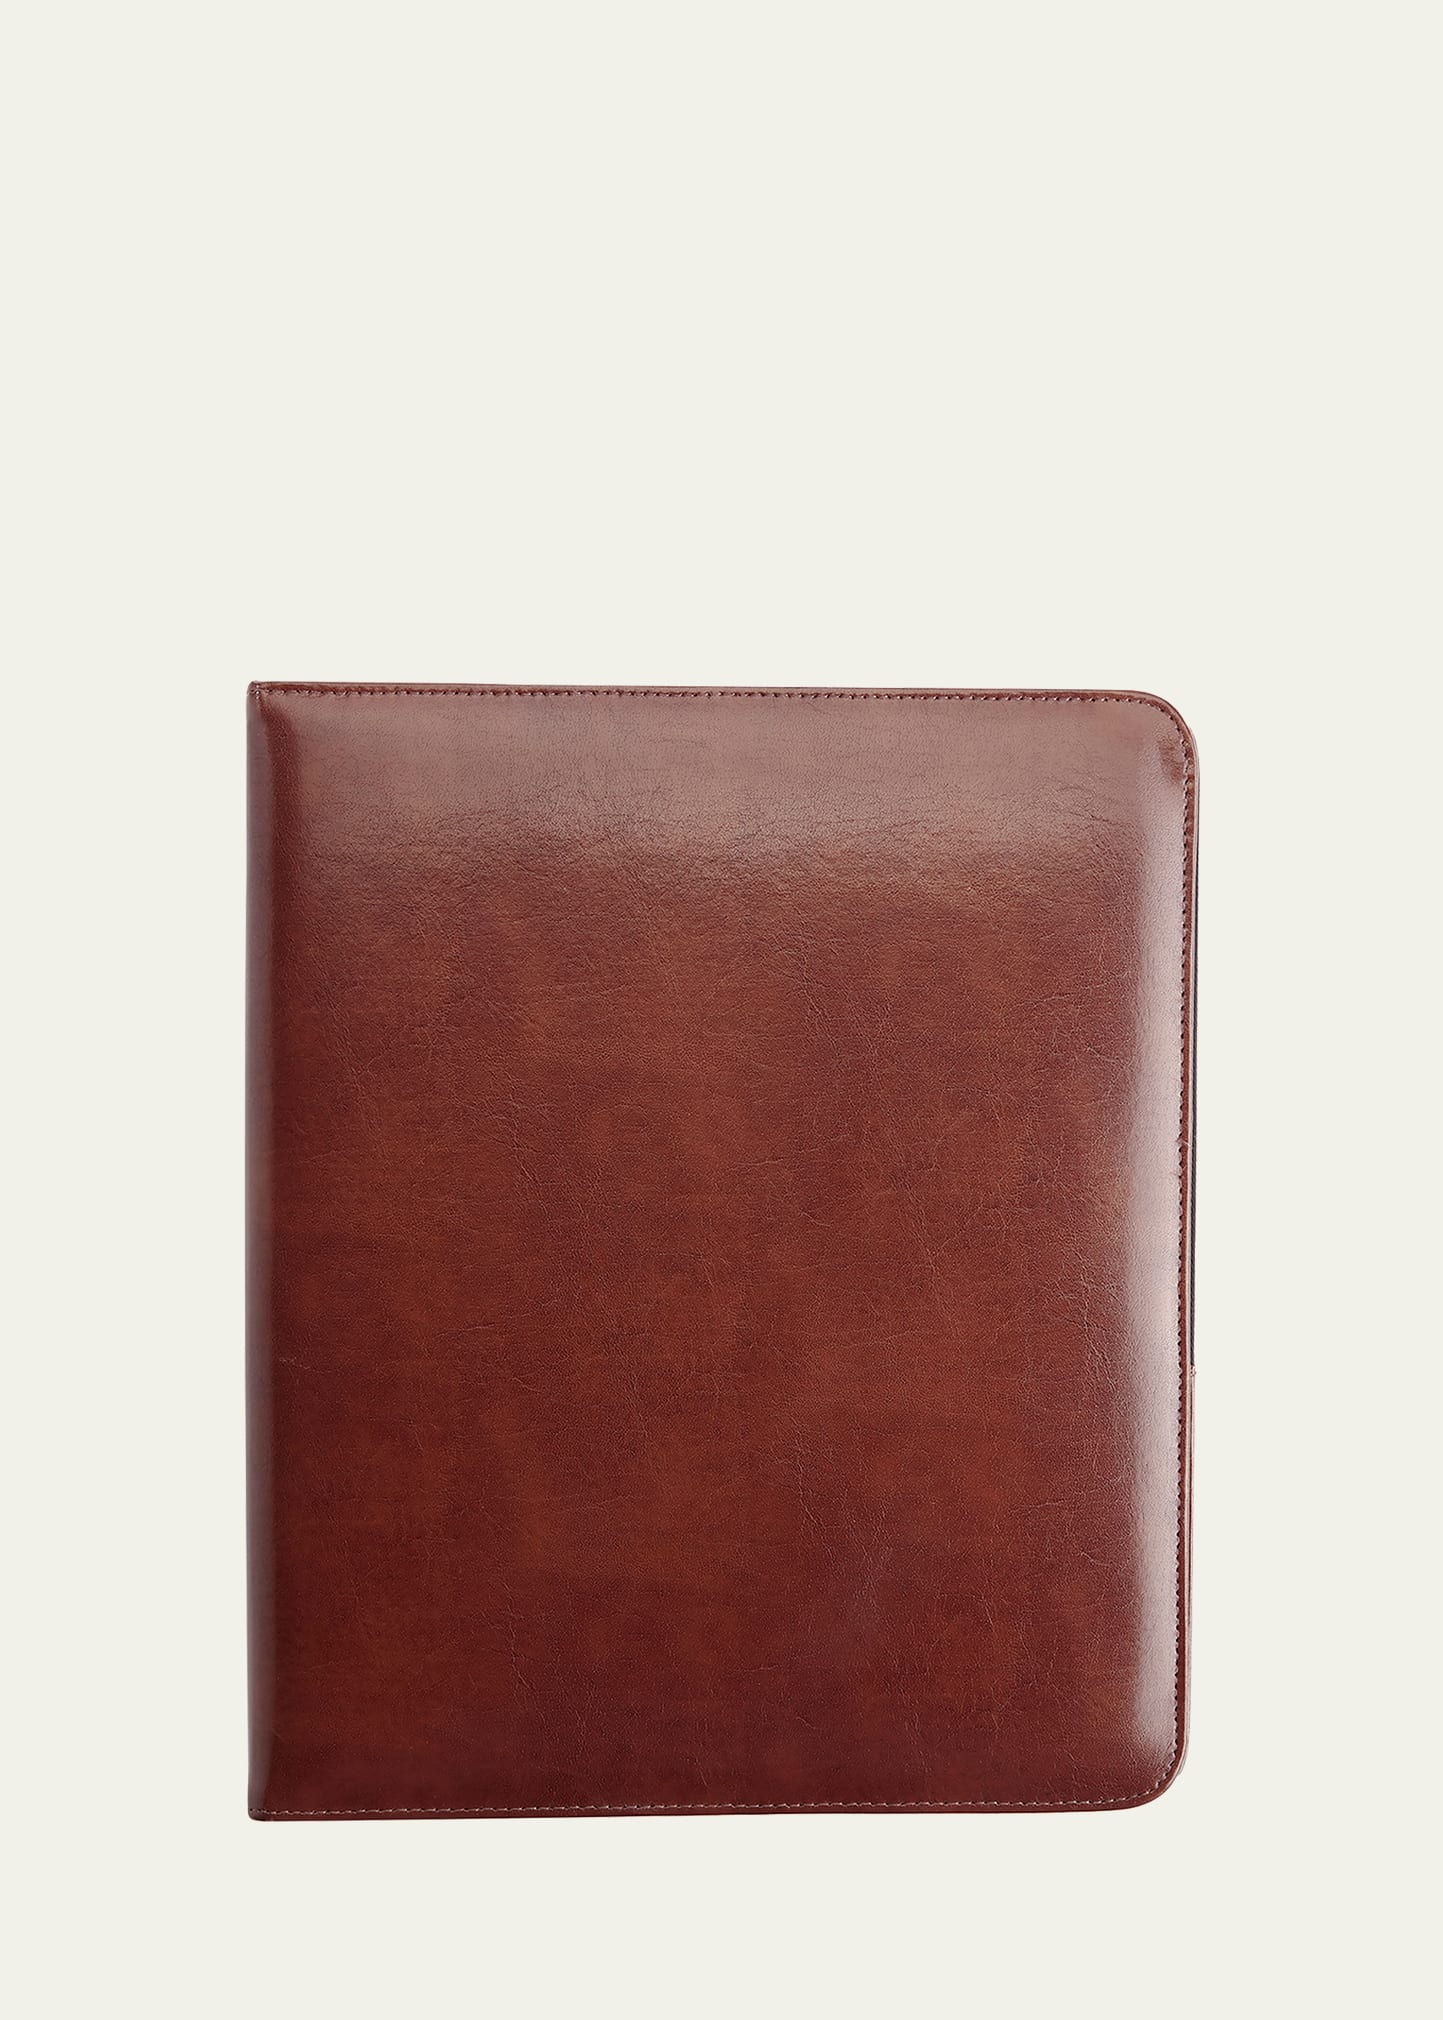 Royce New York Personalized Leather 1" Ring Binder In Brown